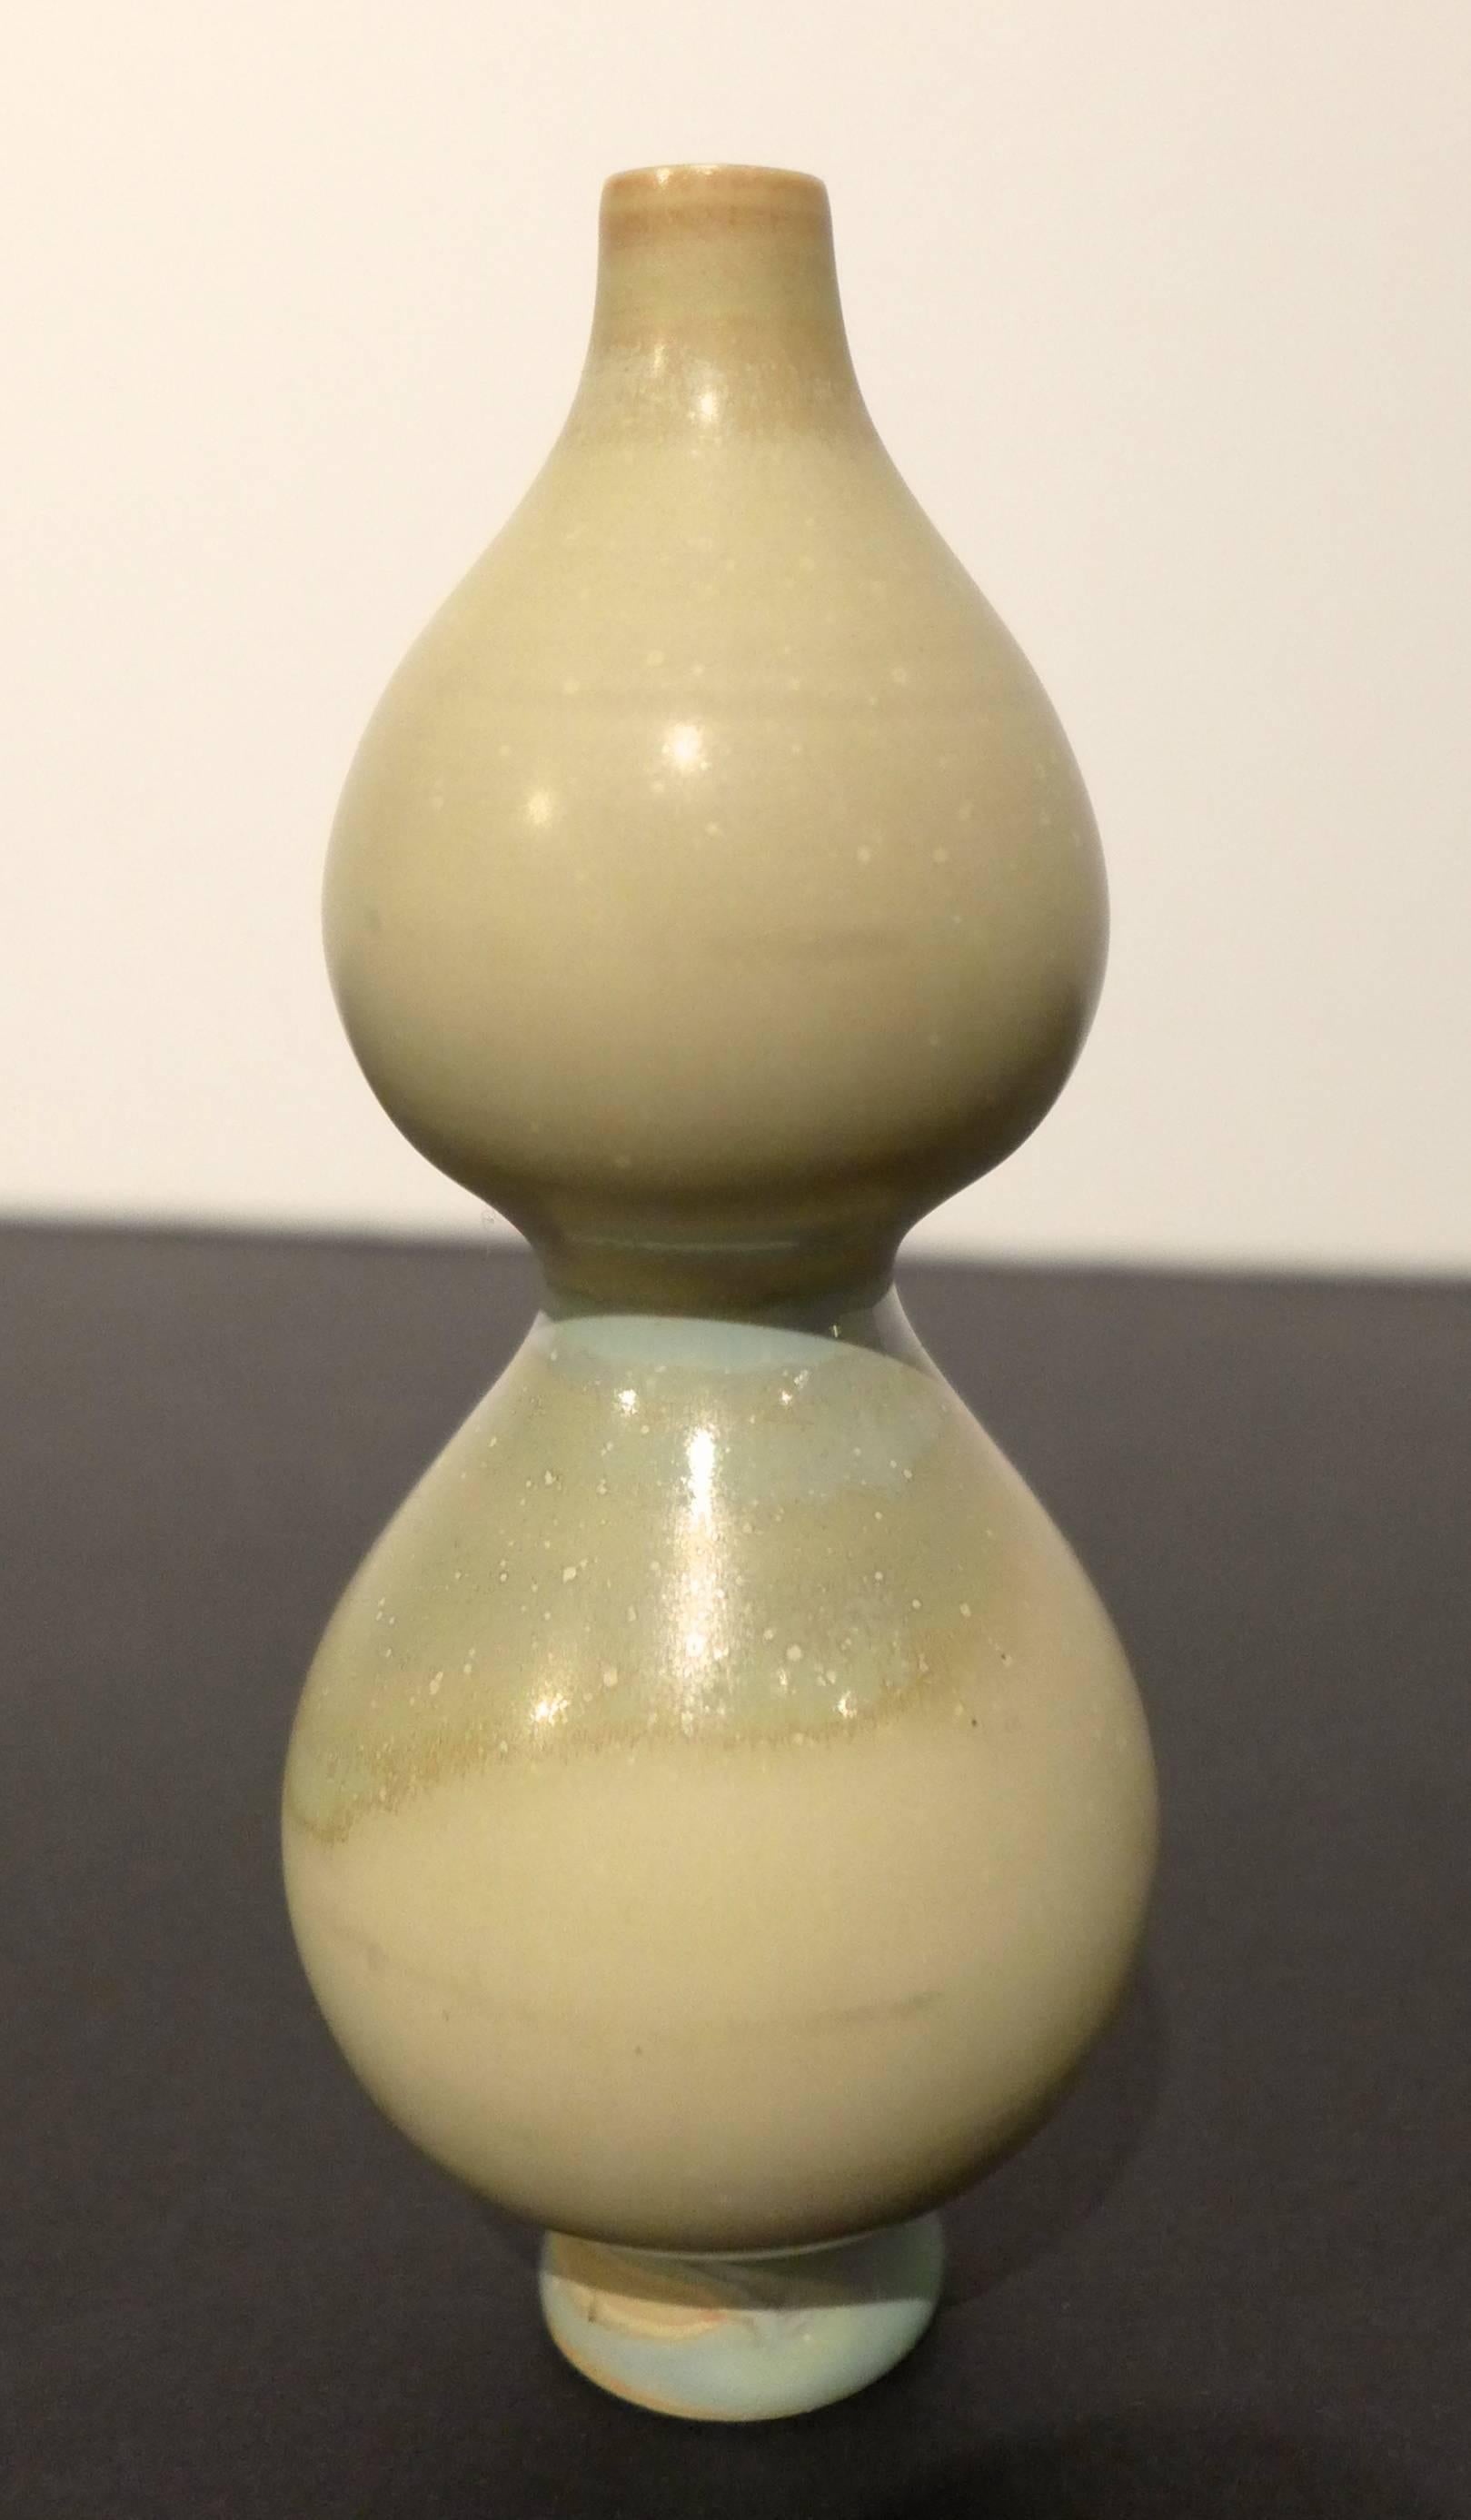 Small gourd-shaped vase with footed base and narrow spout, with multi-chromatic glaze. Made by Swedish ceramist and designer Stig Lindberg at Gustavsberg, circa 1960s. Incised marks to bottom.